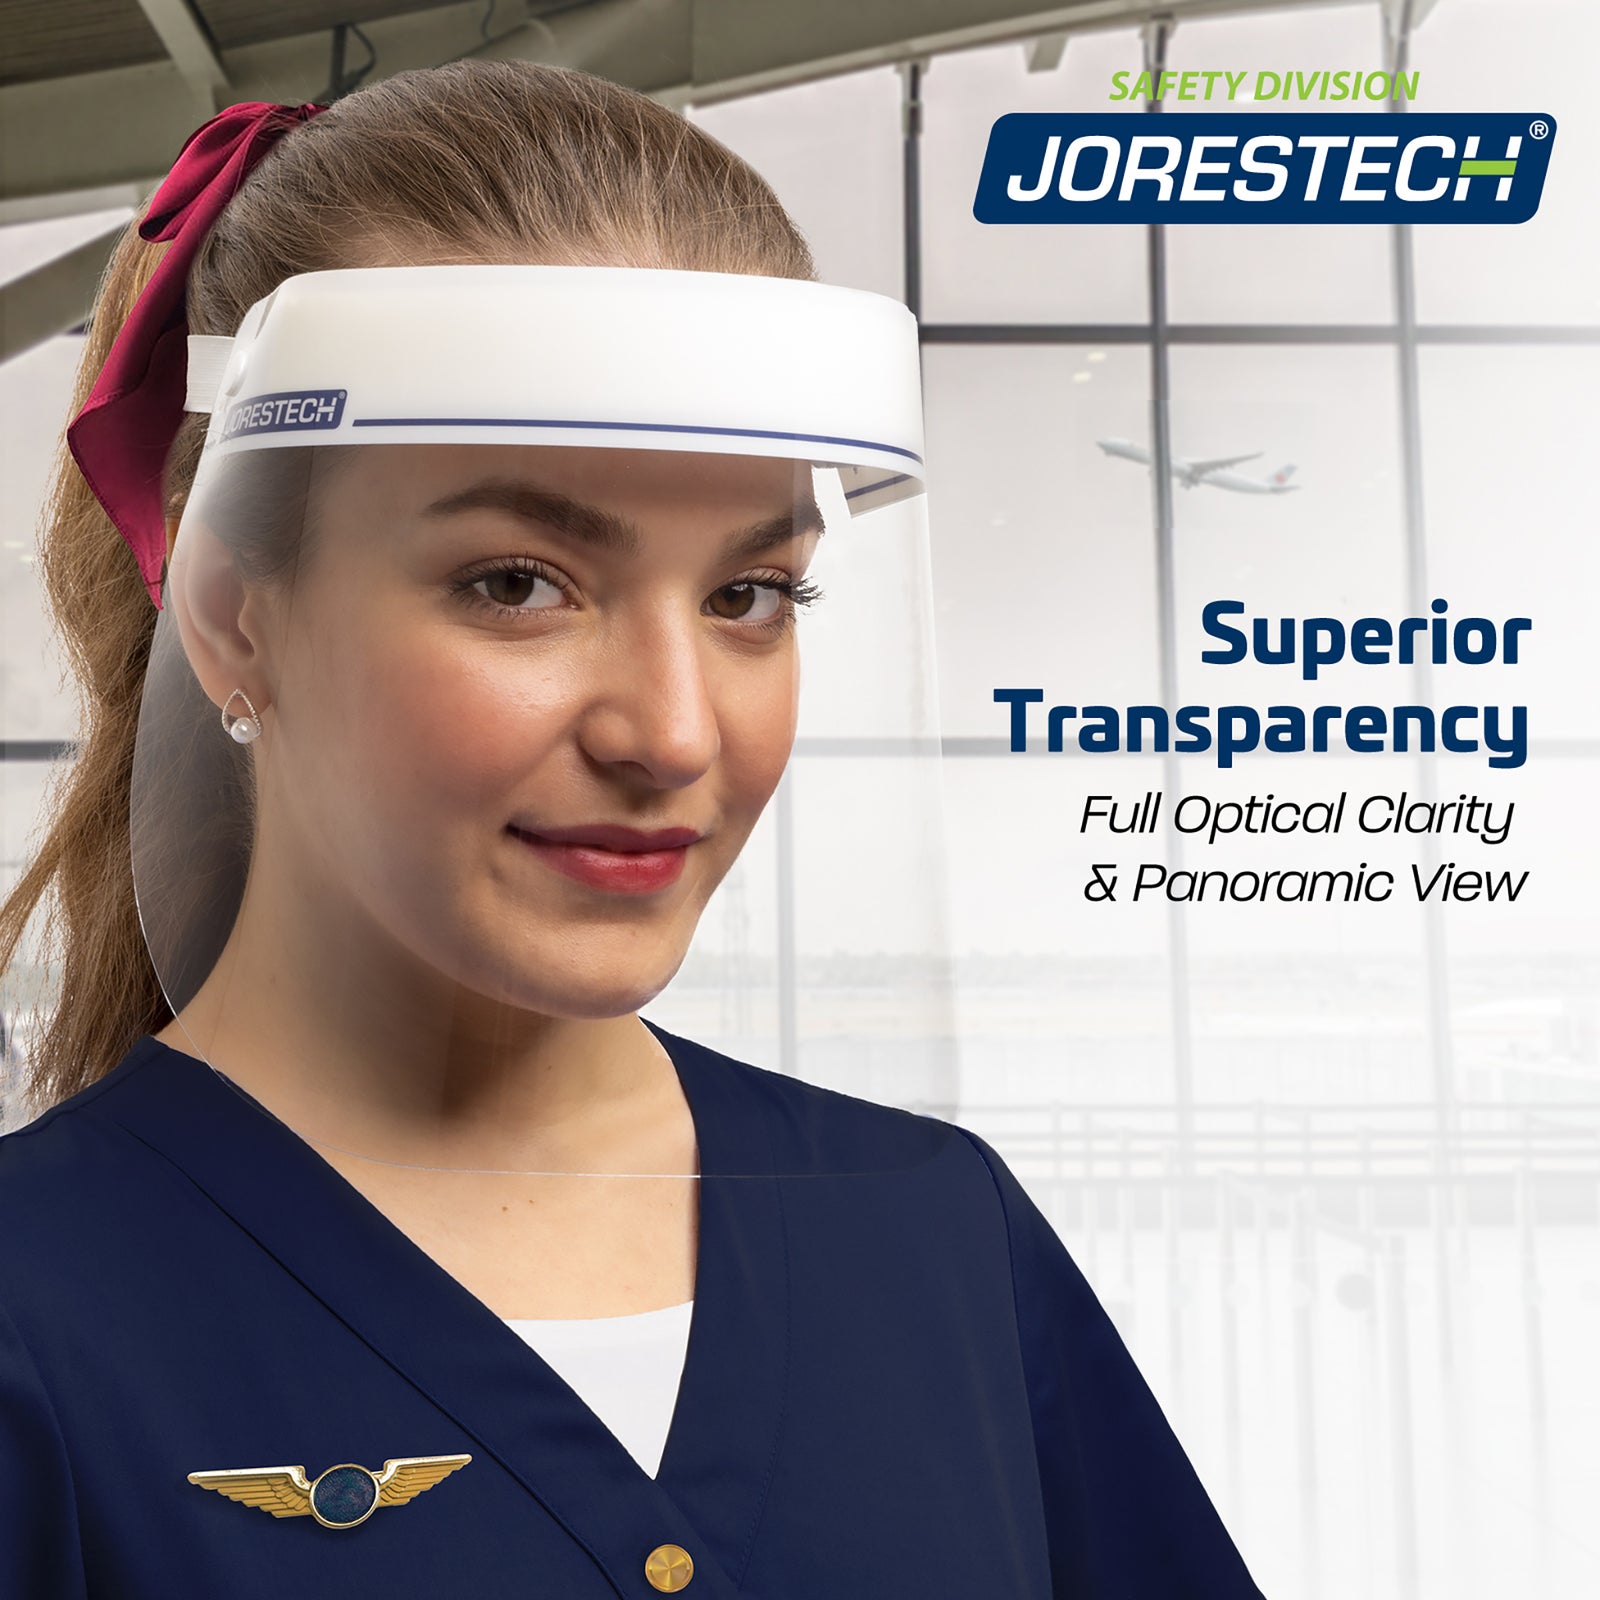 A young lady using a clear protective JORESTECH face shield with elastic headband in a setting of an airport